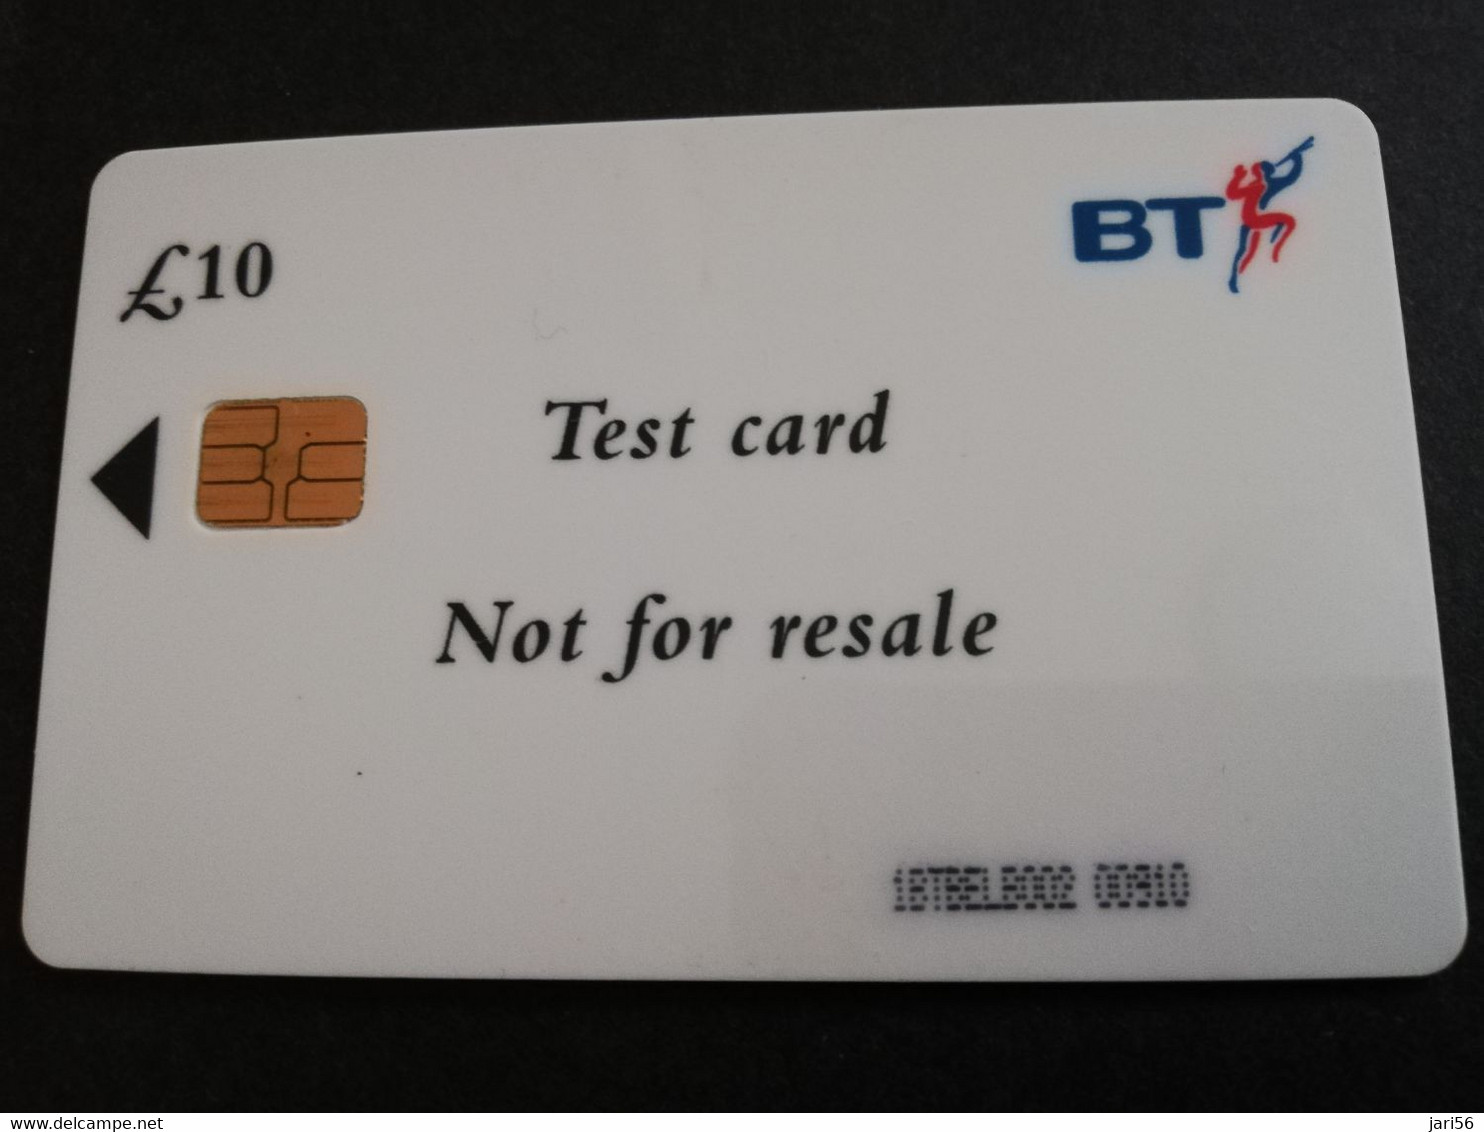 GREAT BRETAGNE  CHIPCARDS / TEST  BT  CARD 10 POUND   PERFECT  CONDITION      **4821** - BT General